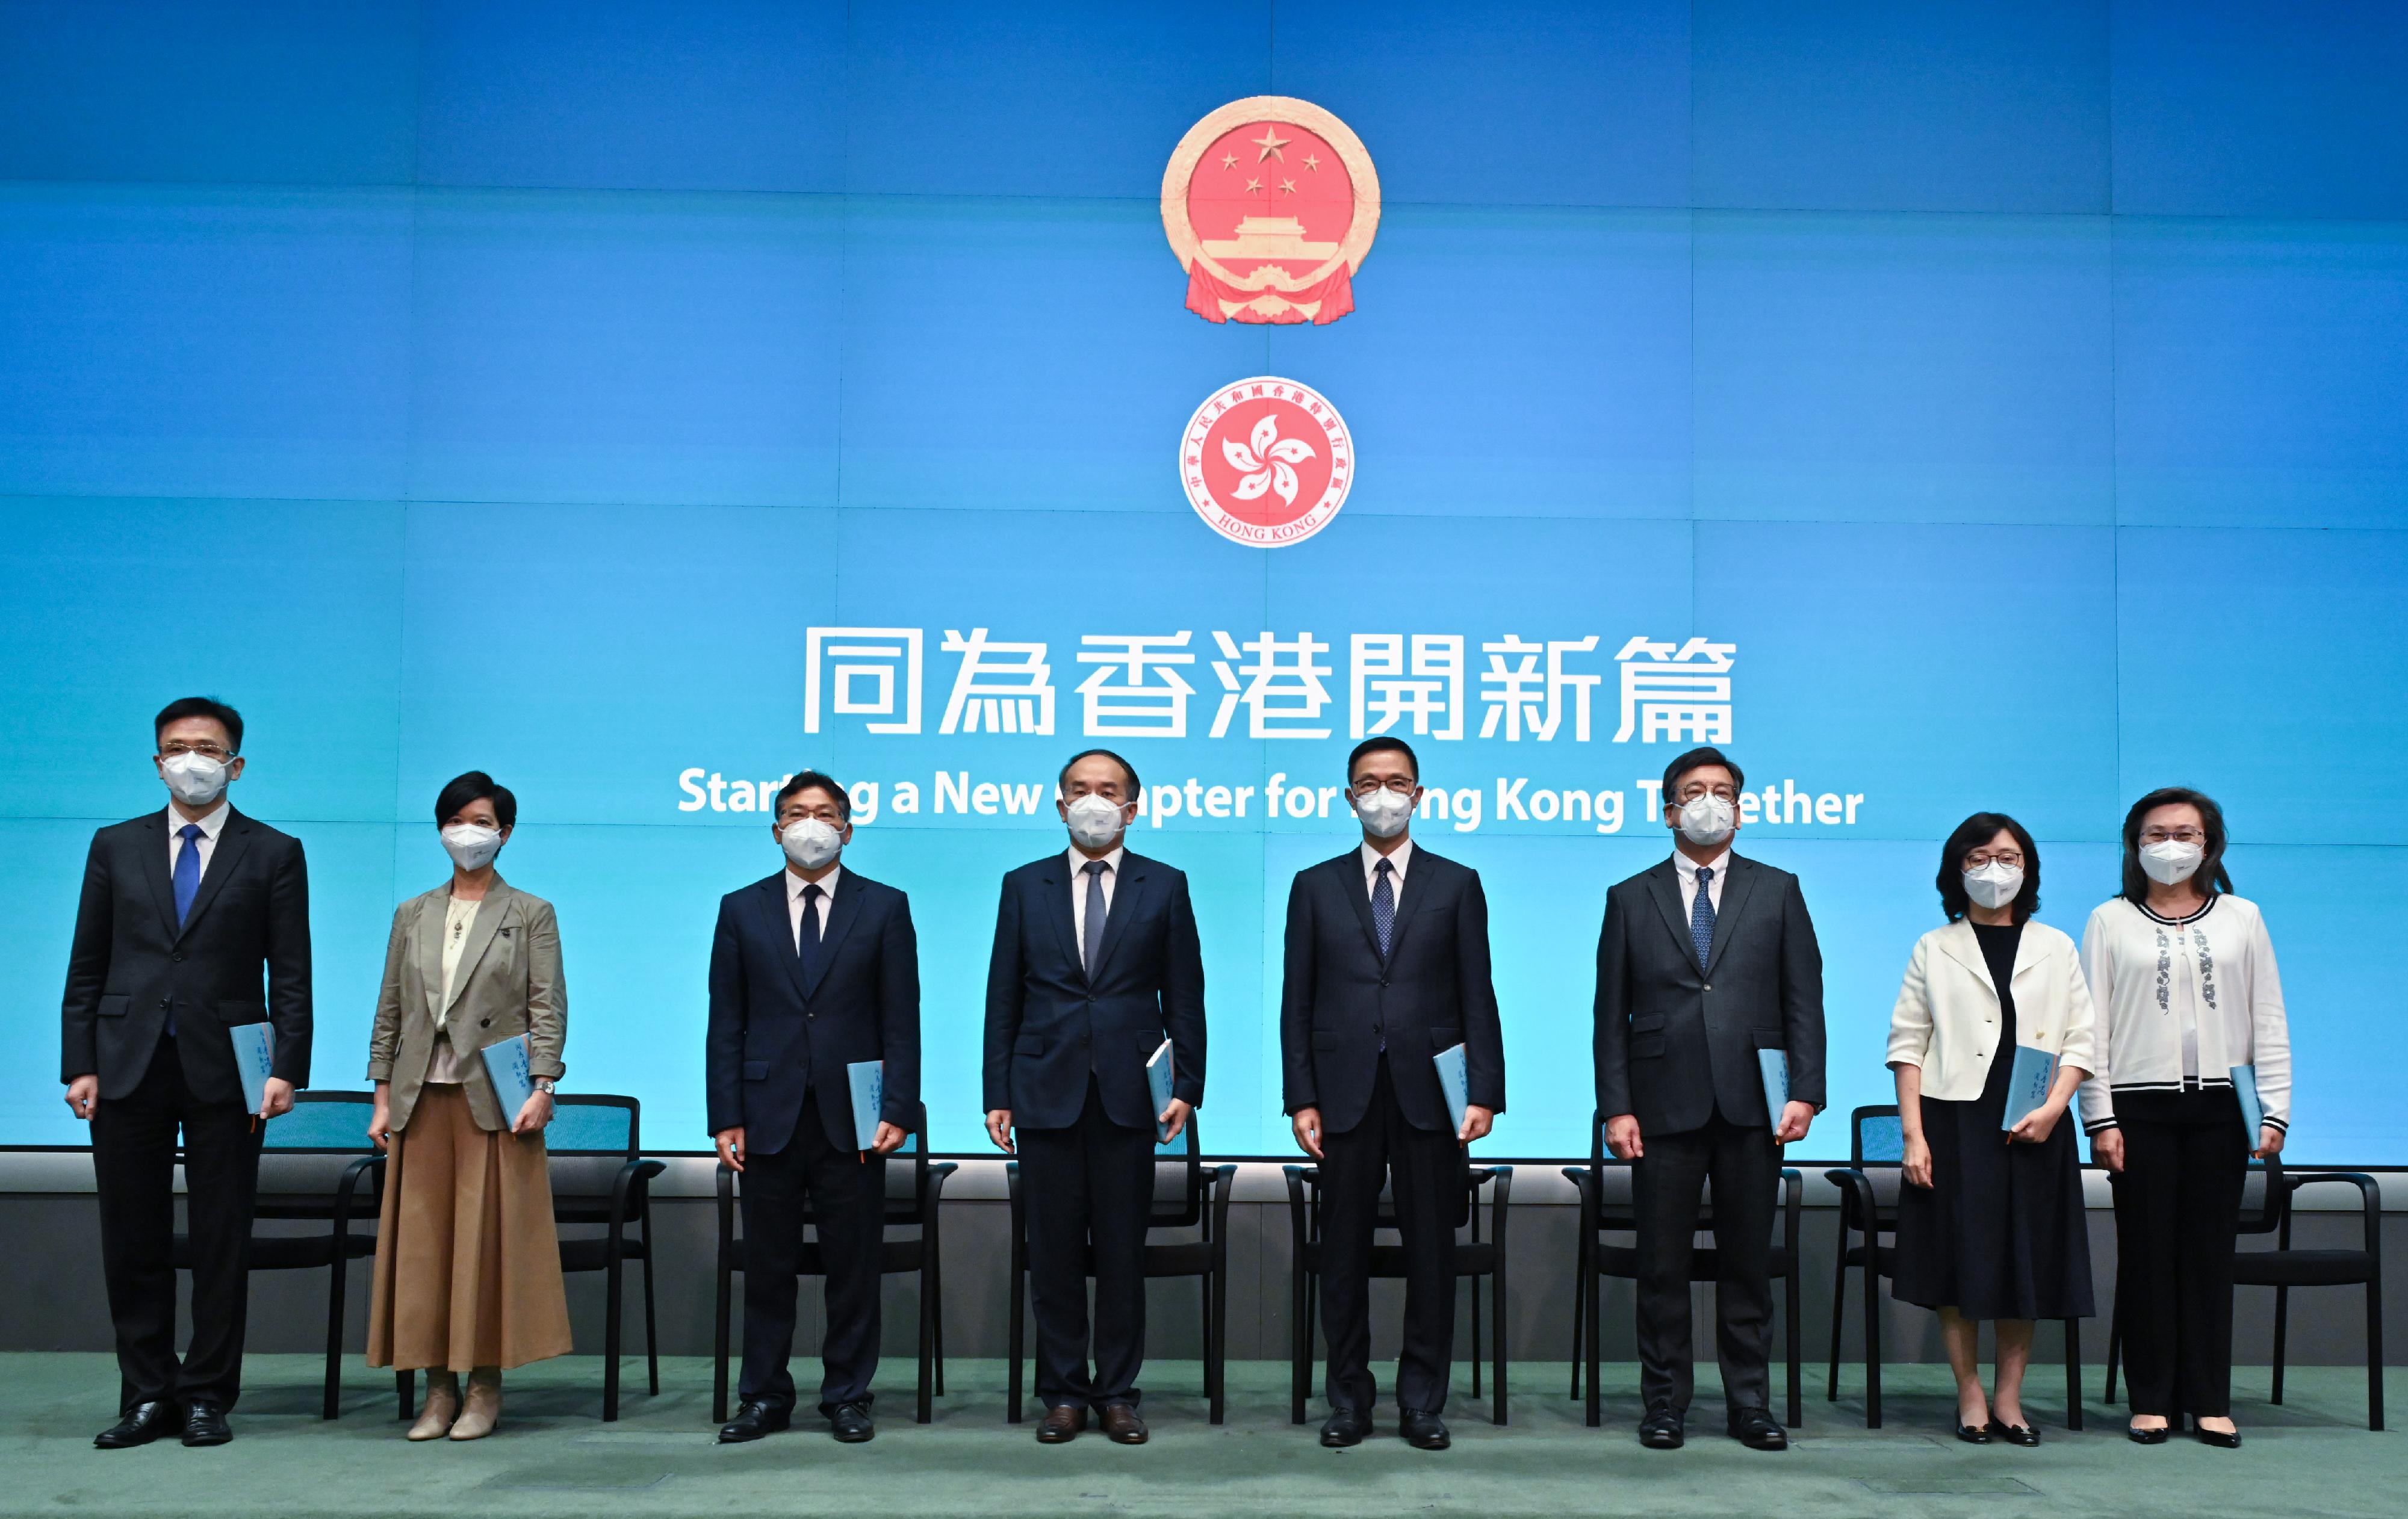 Principal Officials of the sixth-term of the Hong Kong Special Administrative Region Government (from left), the Secretary for Innovation, Technology and Industry (designate), Professor Sun Dong; the Secretary for Housing (designate), Ms Winnie Ho; the Secretary for Transport and Logistics (designate), Mr Lam Sai-hung; the Secretary for Financial Services and the Treasury (designate), Mr Christopher Hui; the Secretary for Culture, Sports and Tourism (designate), Mr Kevin Yeung; the Secretary for Commerce and Economic Development (designate), Mr Algernon Yau; the Secretary for Development (designate), Ms Bernadette Linn; and the Secretary for the Civil Service (designate), Mrs Ingrid Yeung, meet the media today (June 19).